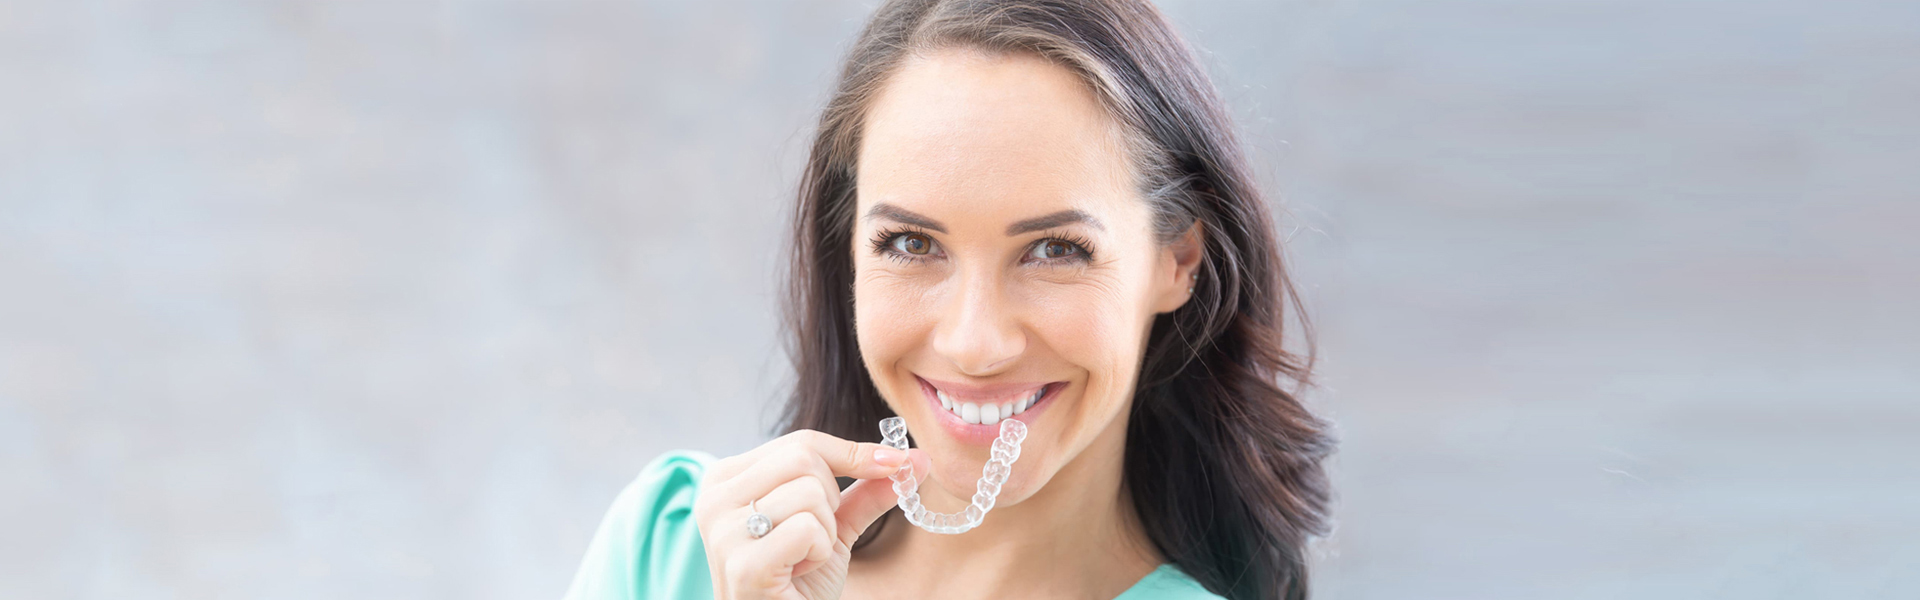 Invisalign Clear Aligners: An Effective Way of Straightening Your Smile